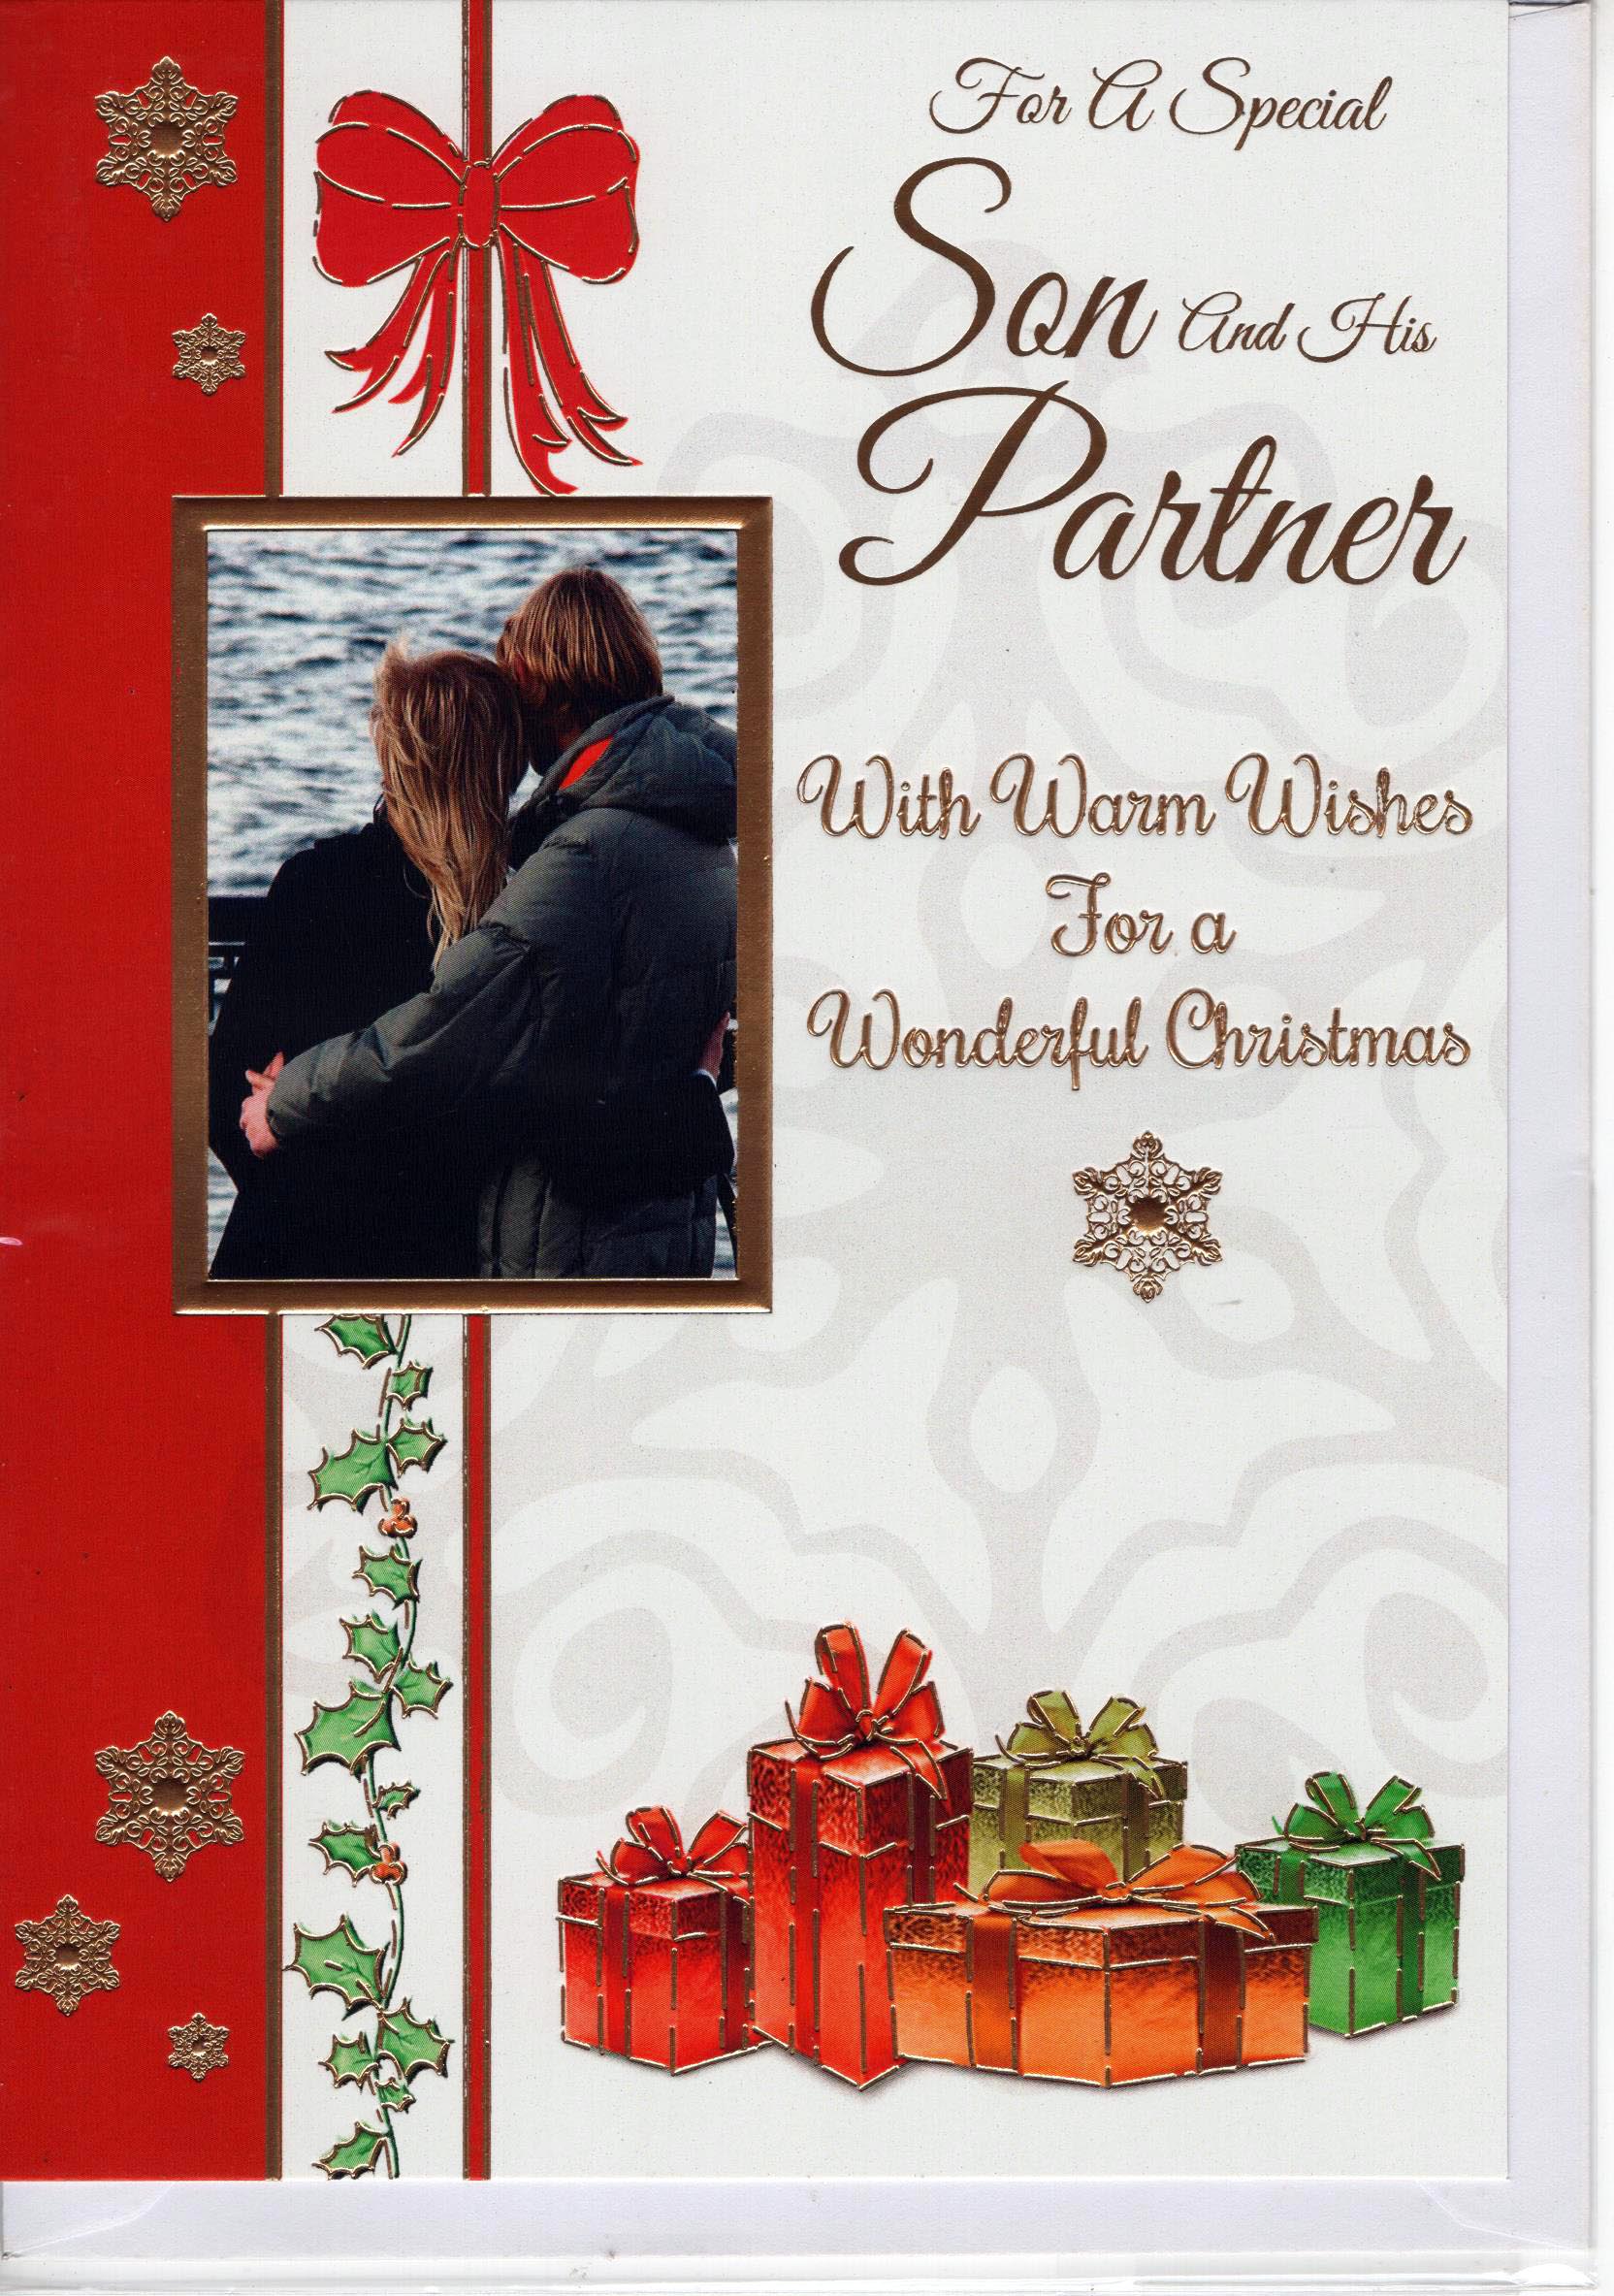 For a Special Son and His Partner With Warm Wishes for a Wonderful Christmas